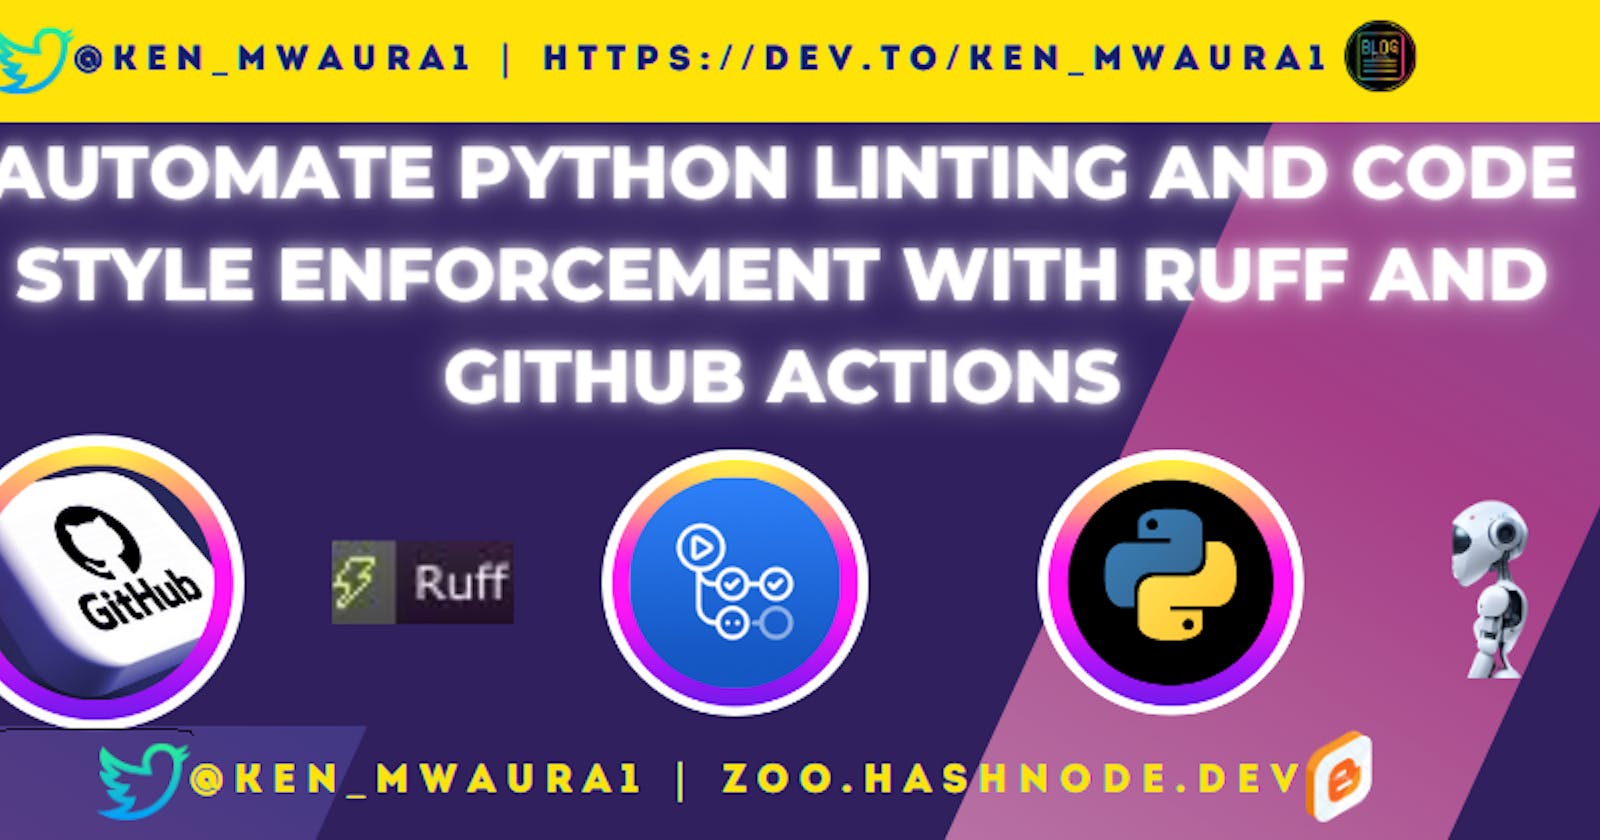 Automate Python Linting and Code Style Enforcement with Ruff and GitHub Actions